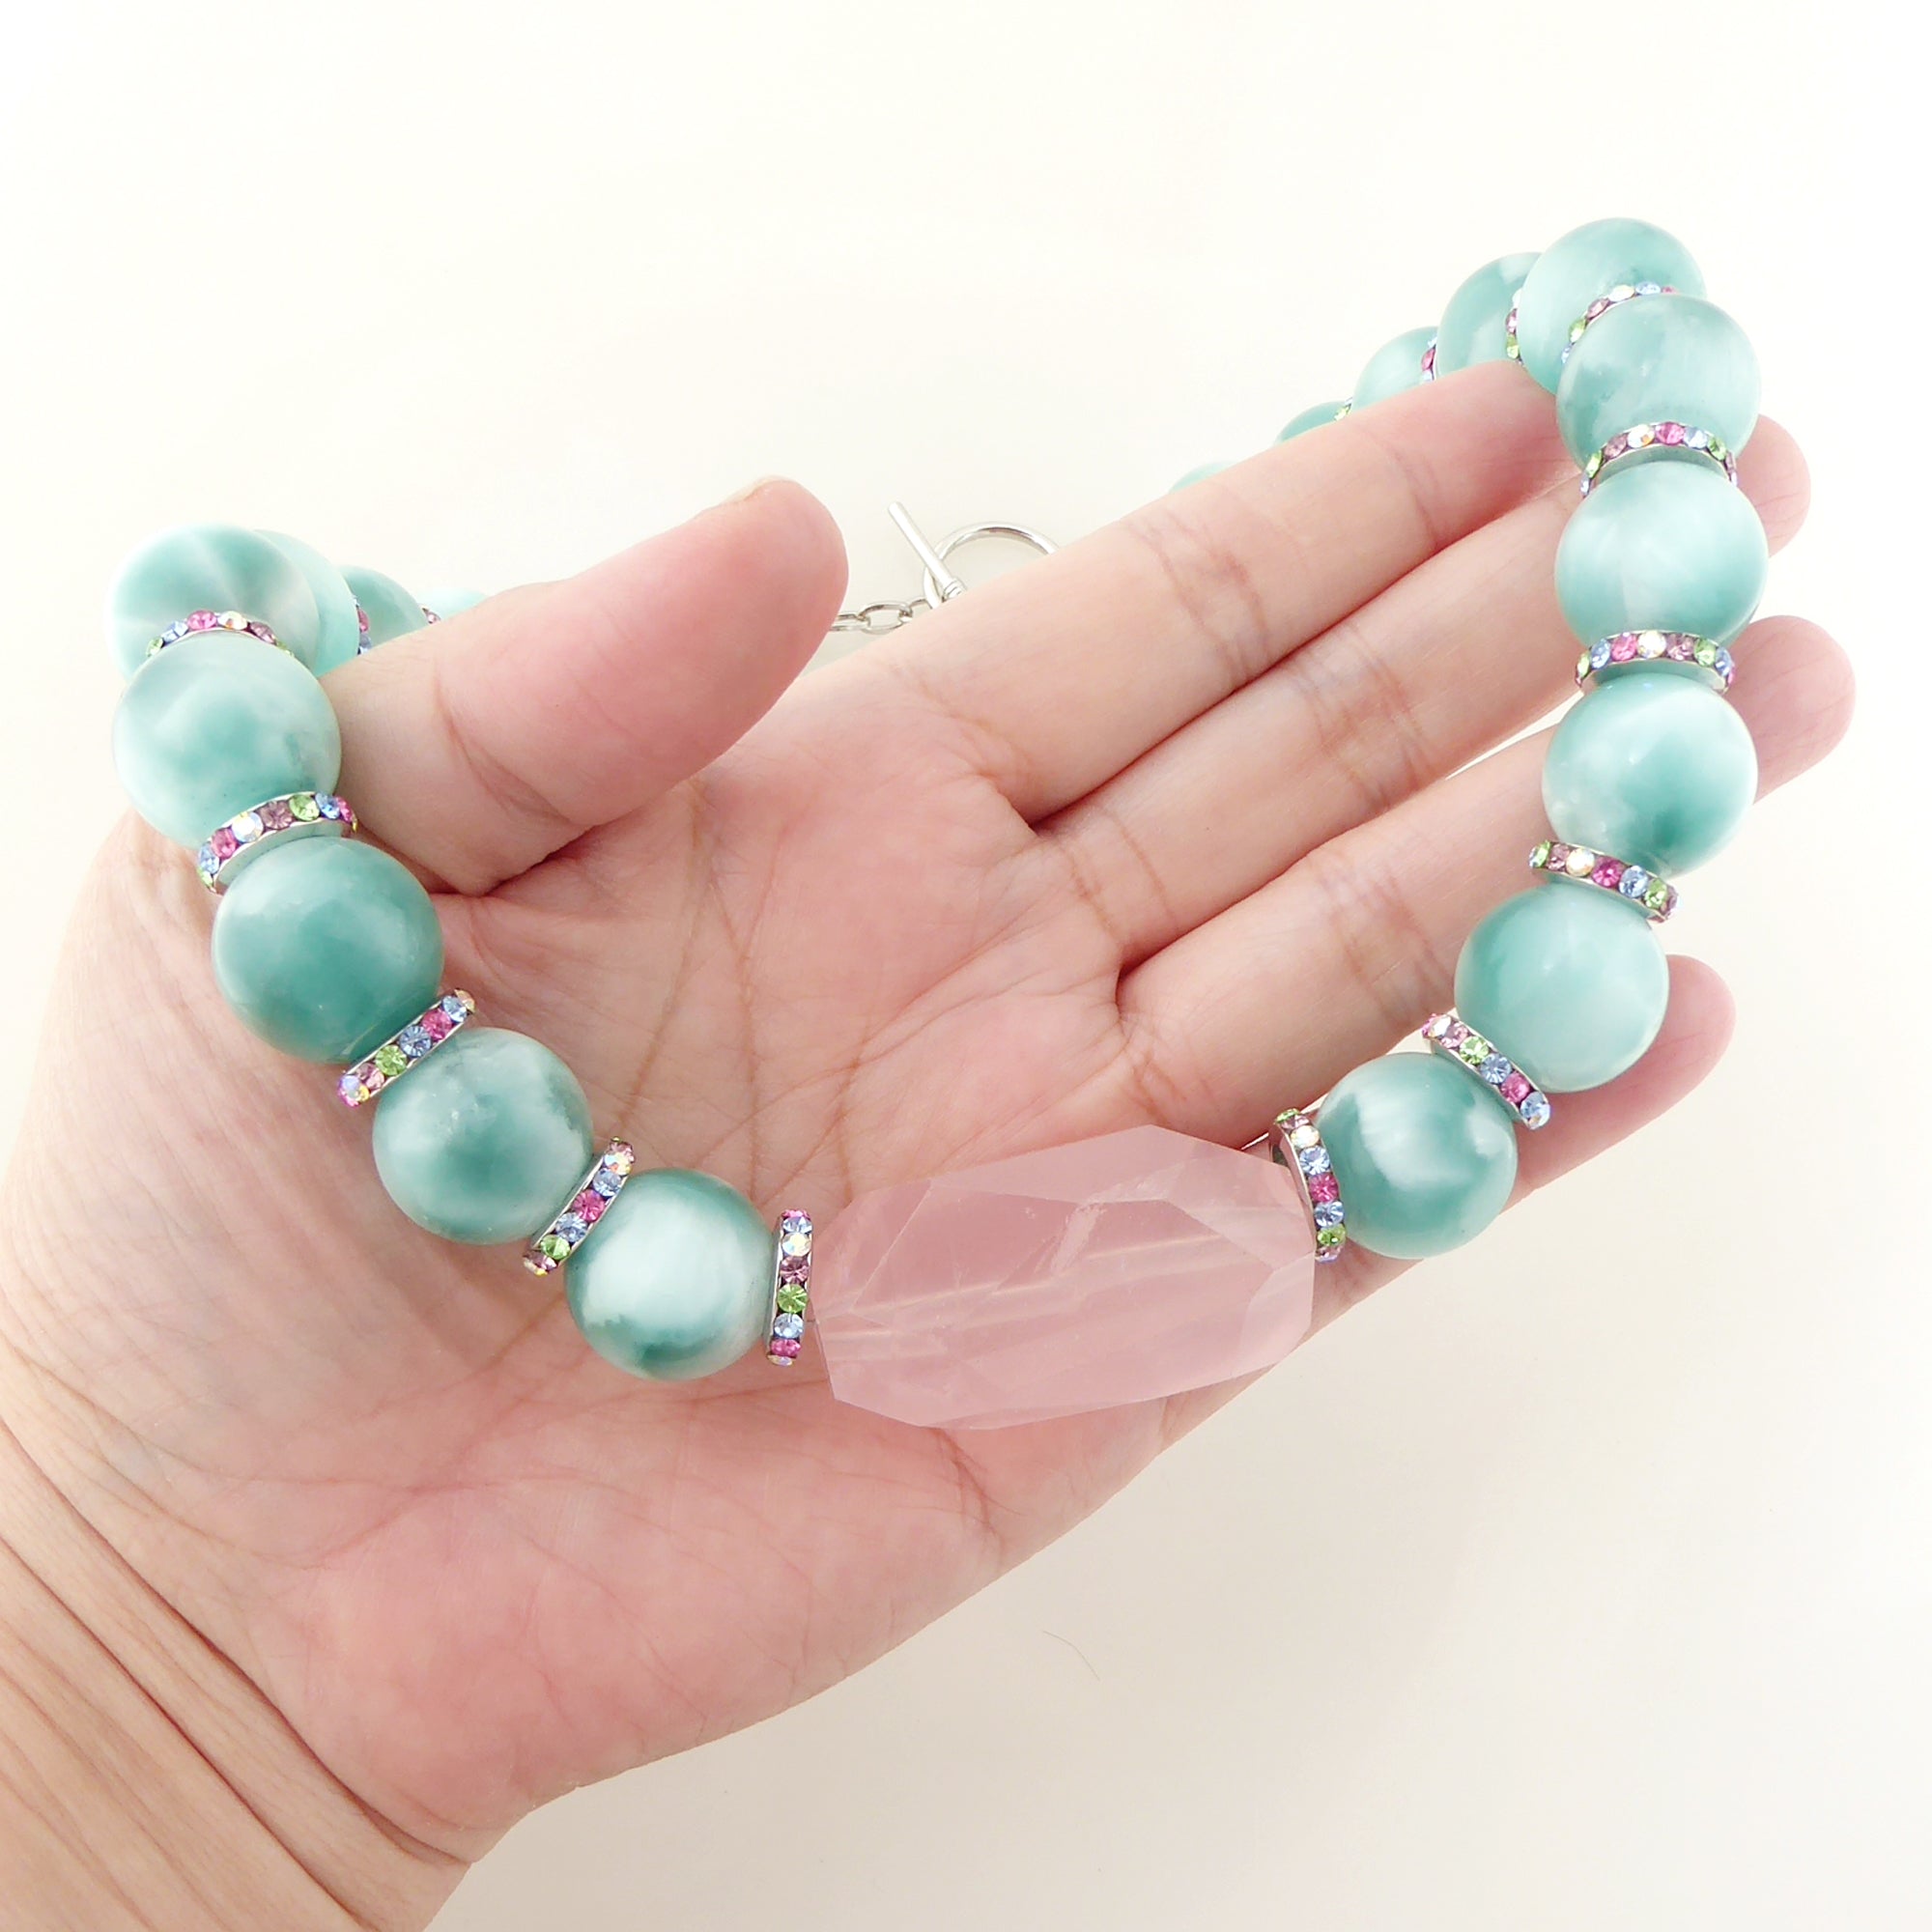 Green moonstone and rose quartz necklace by Jenny Dayco 6